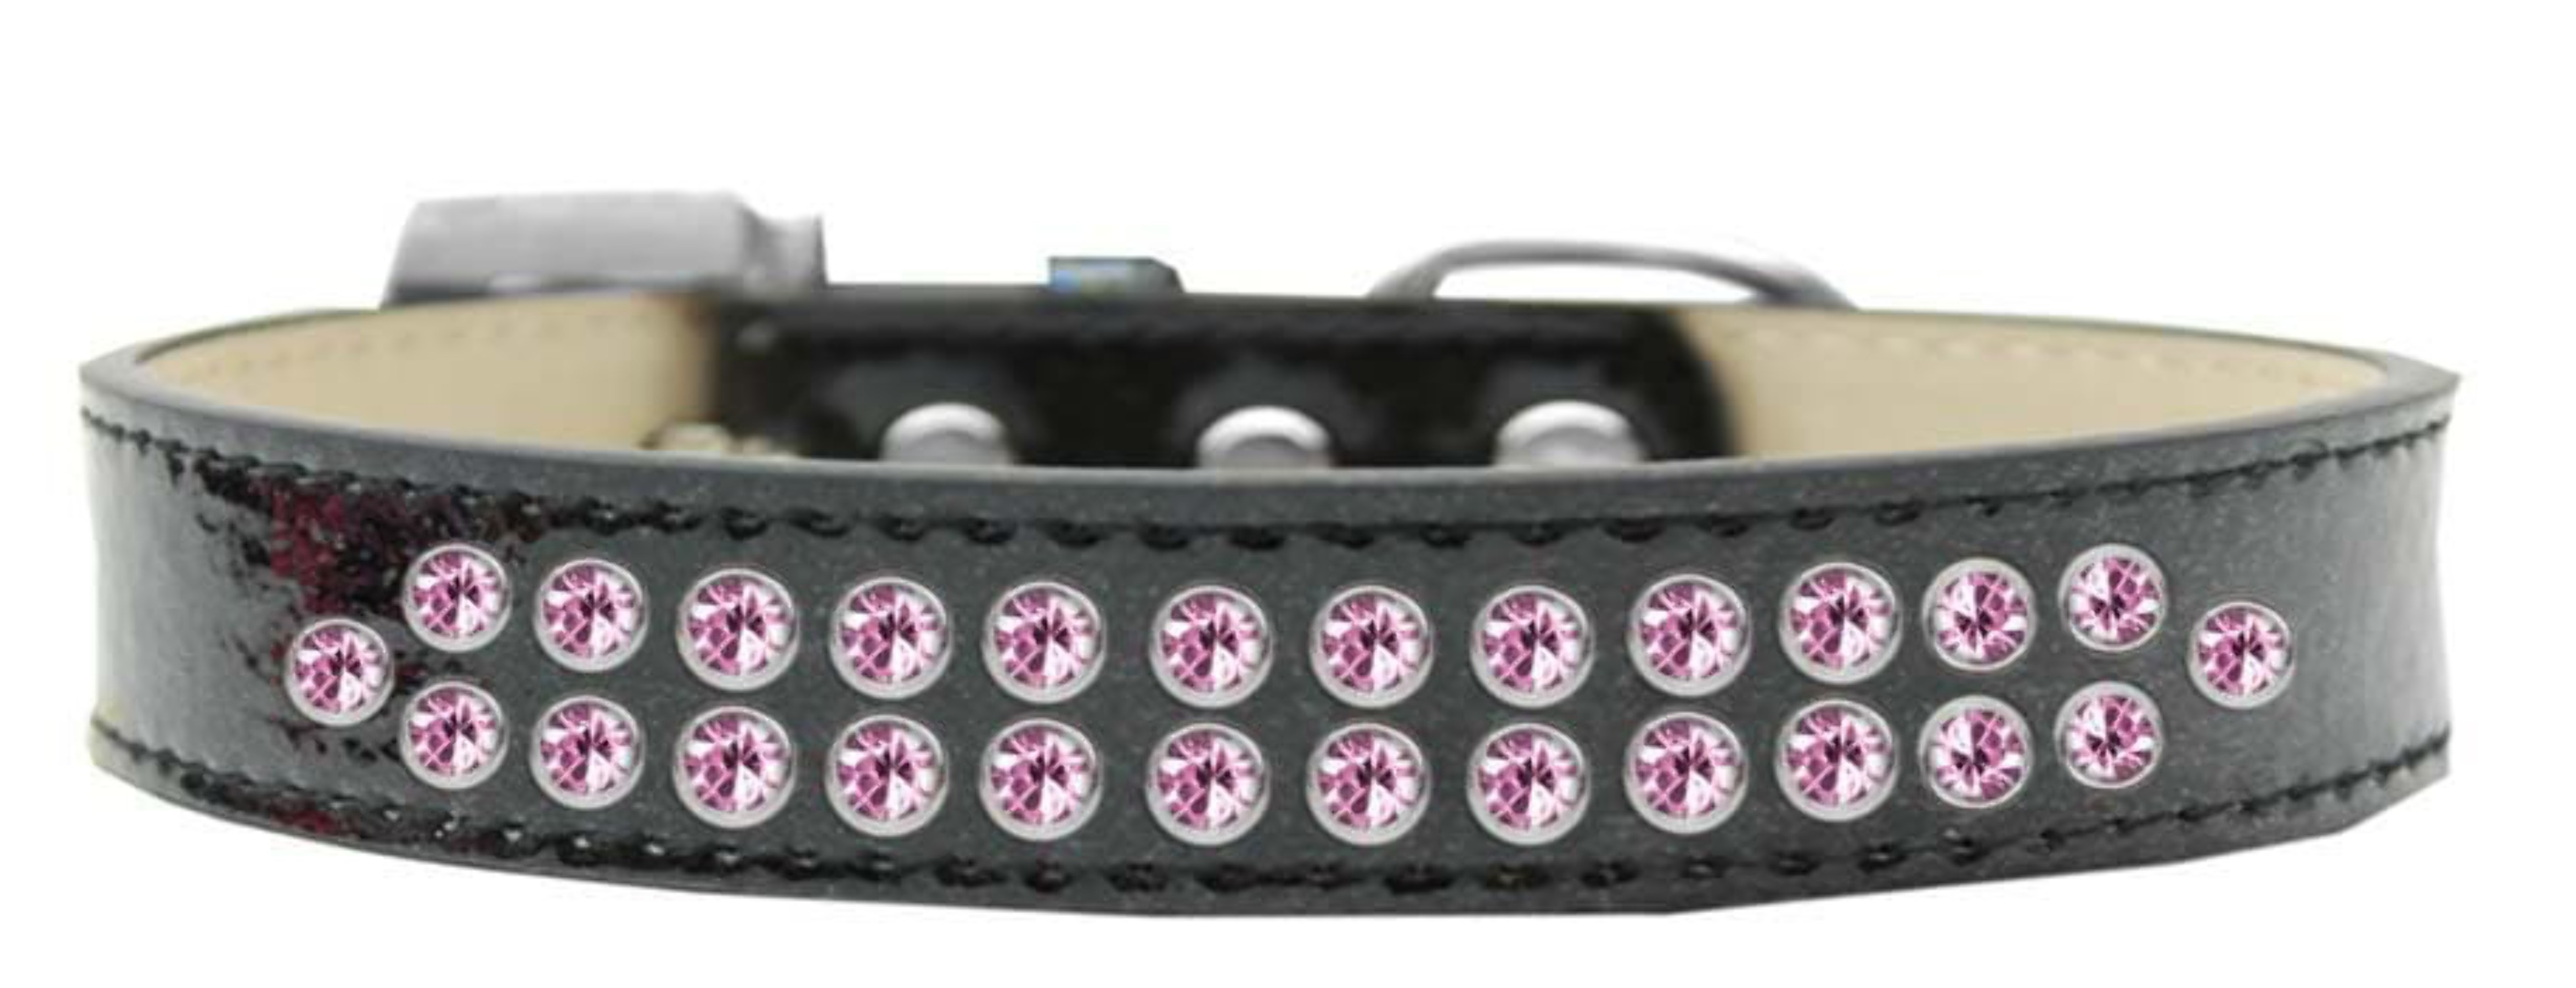 Mirage Pet Products614-06 BK-12 Two Row Light Pink Crystal Dog Collar, Black Ice Cream - Size 12 - image 3 of 5